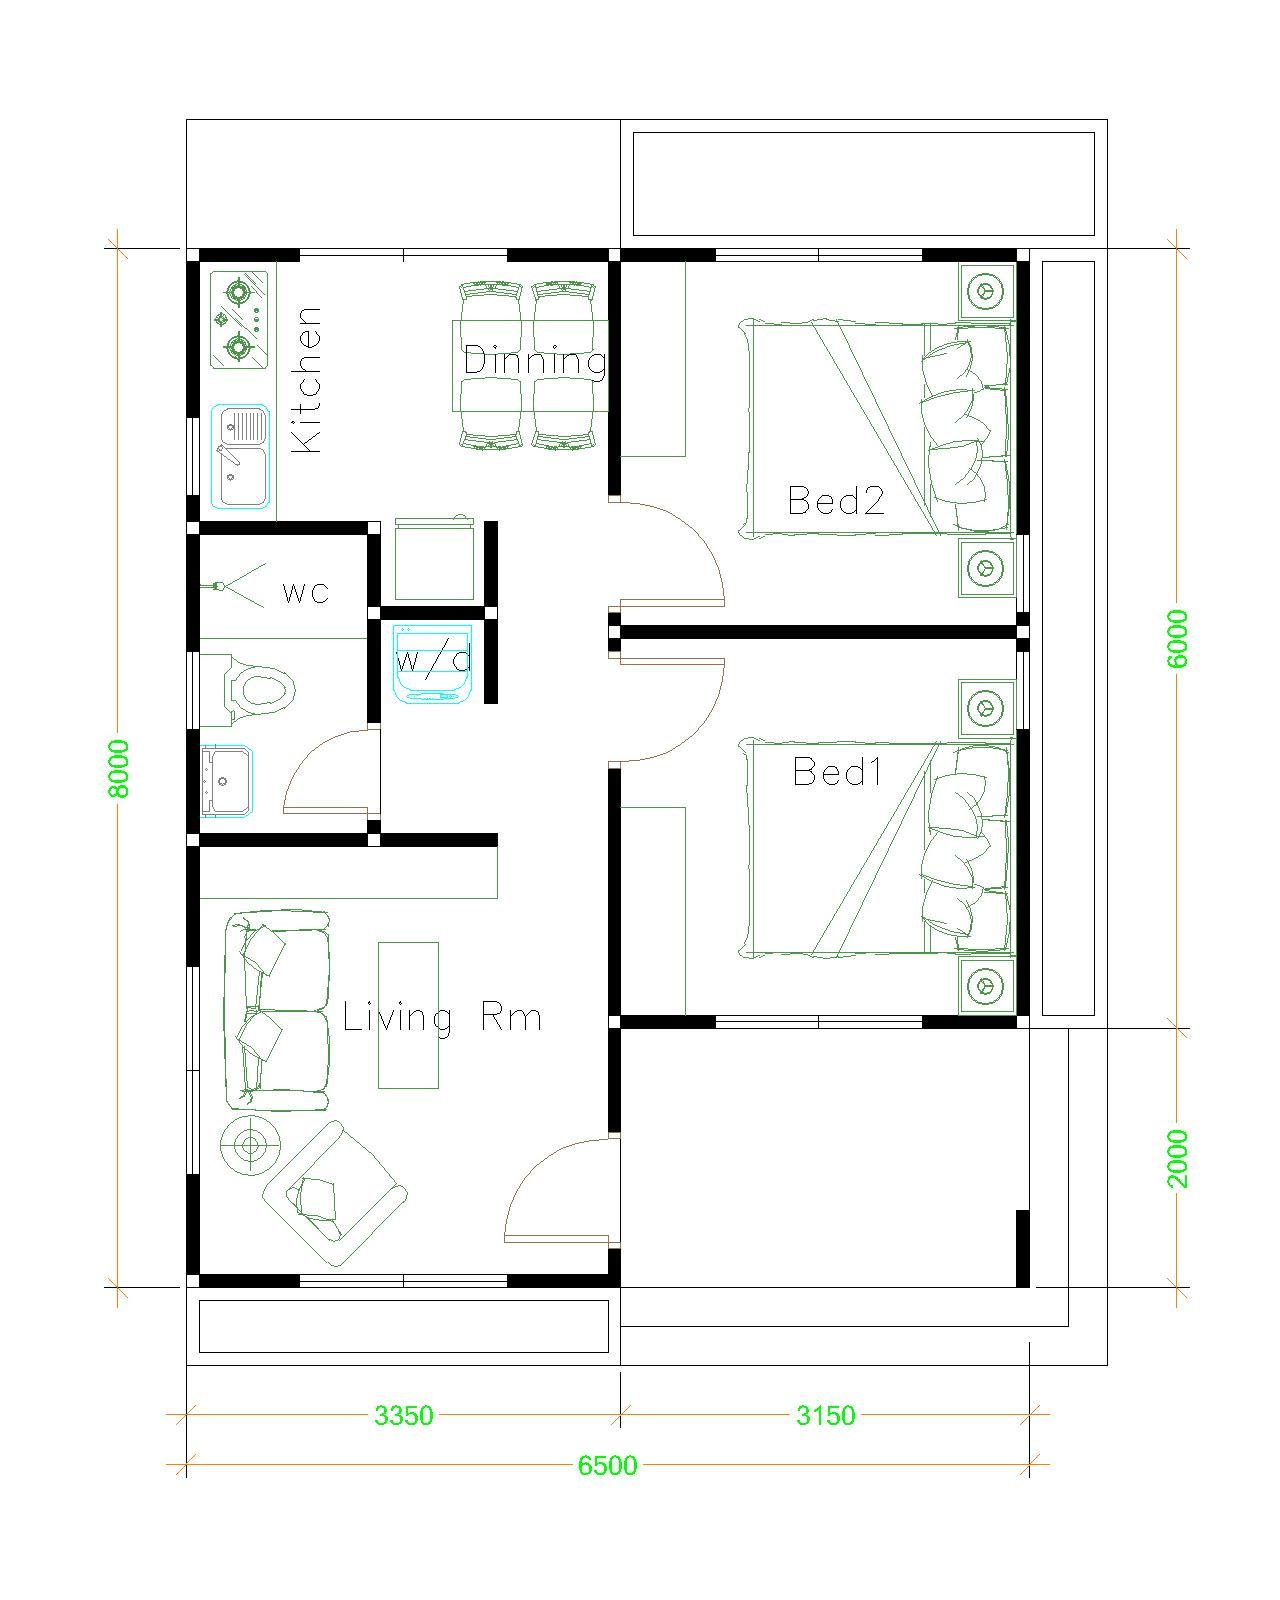 House Design Plans 6.5x8 with 2 Bedrooms Hip Roof layout plan